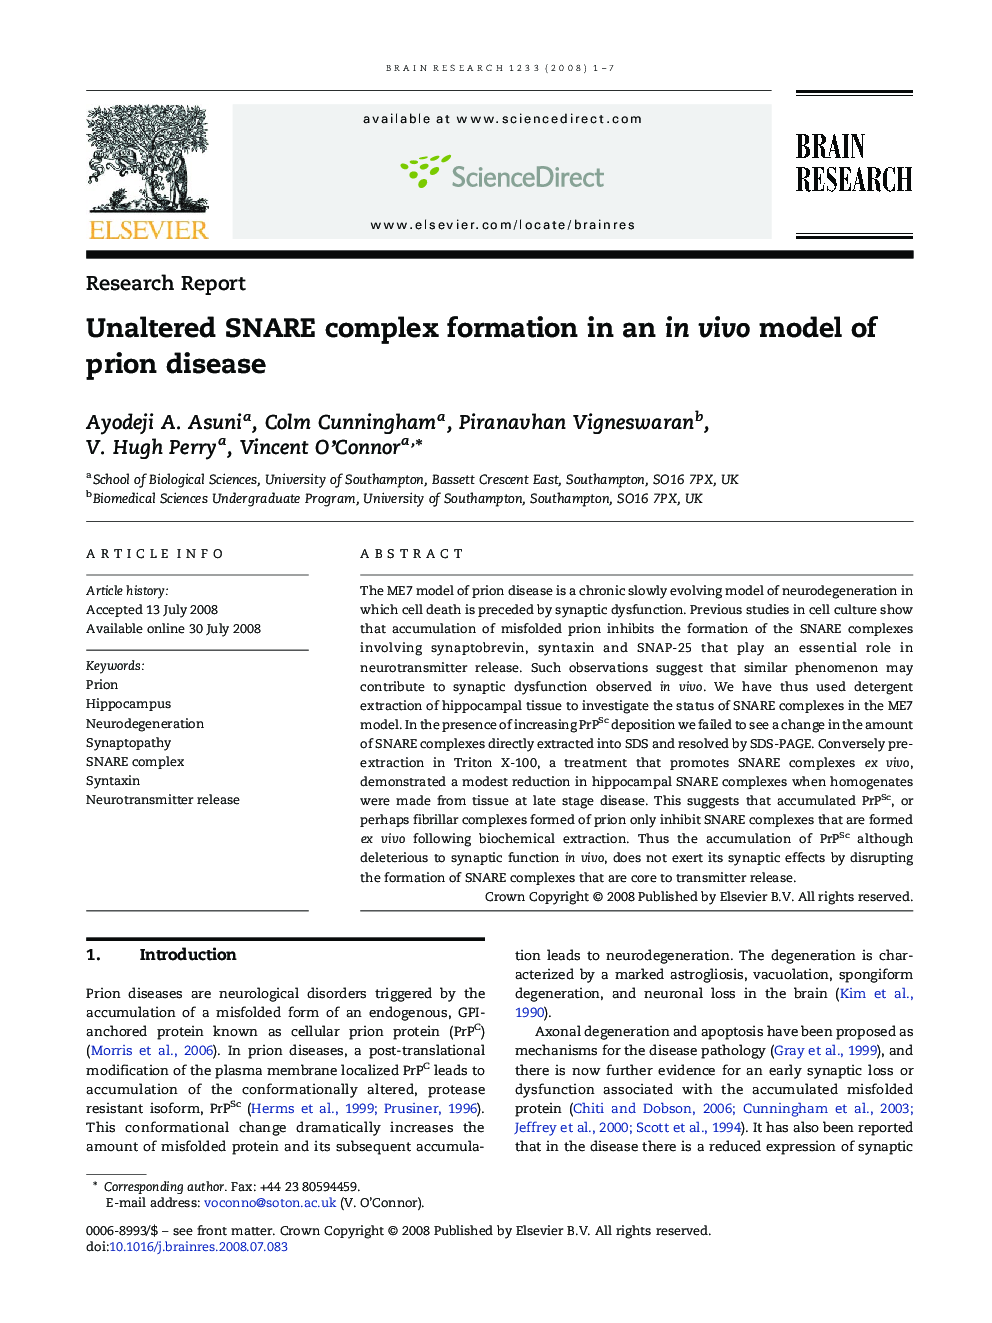 Unaltered SNARE complex formation in an in vivo model of prion disease